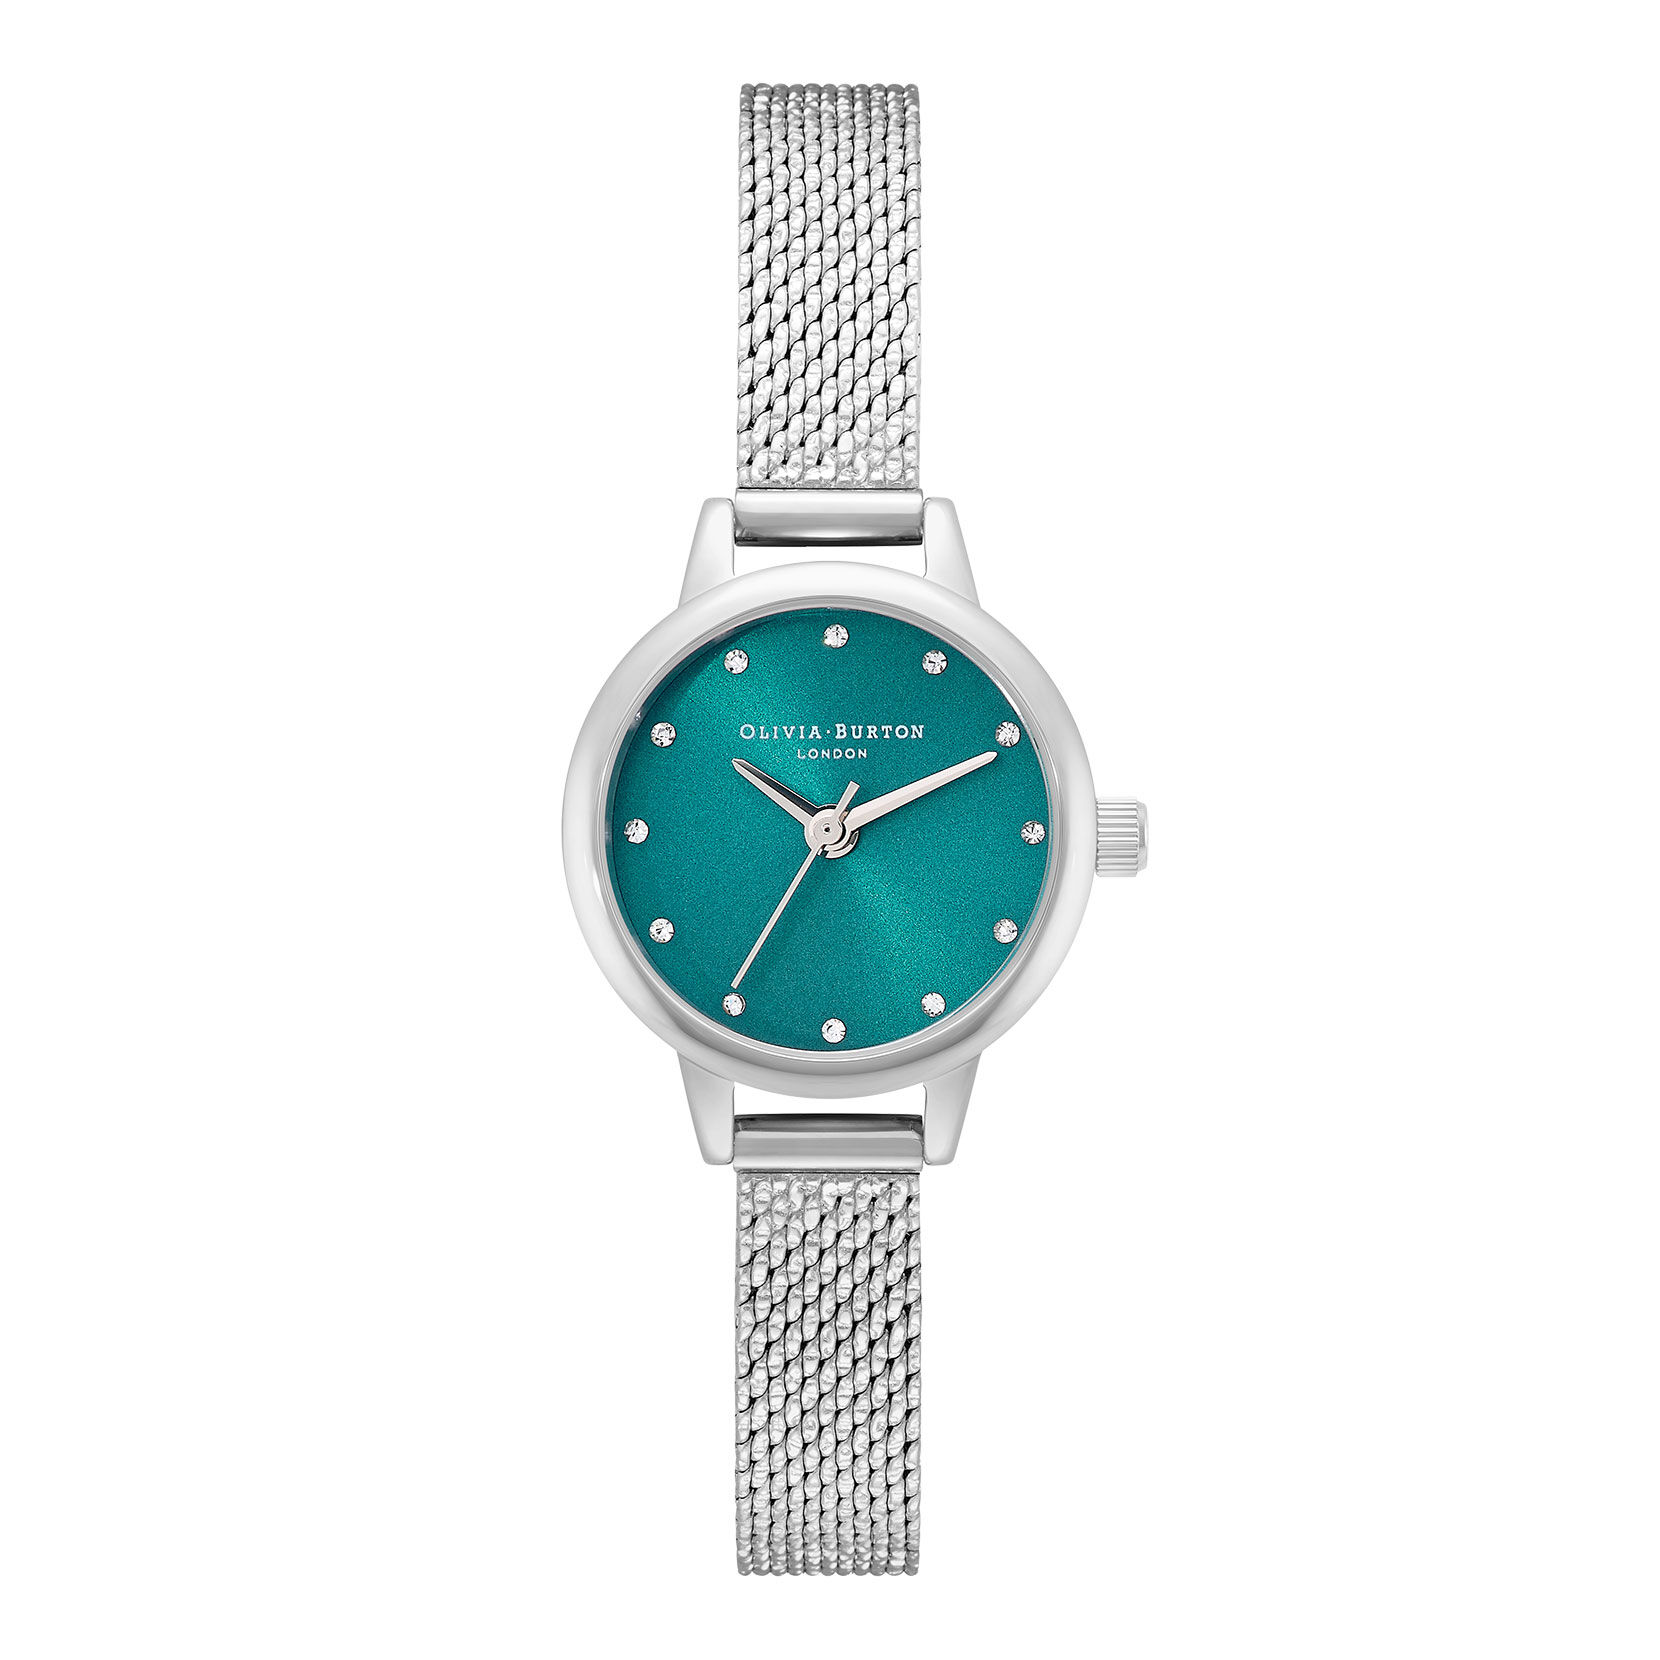 23mm Teal & Silver Mesh Watch